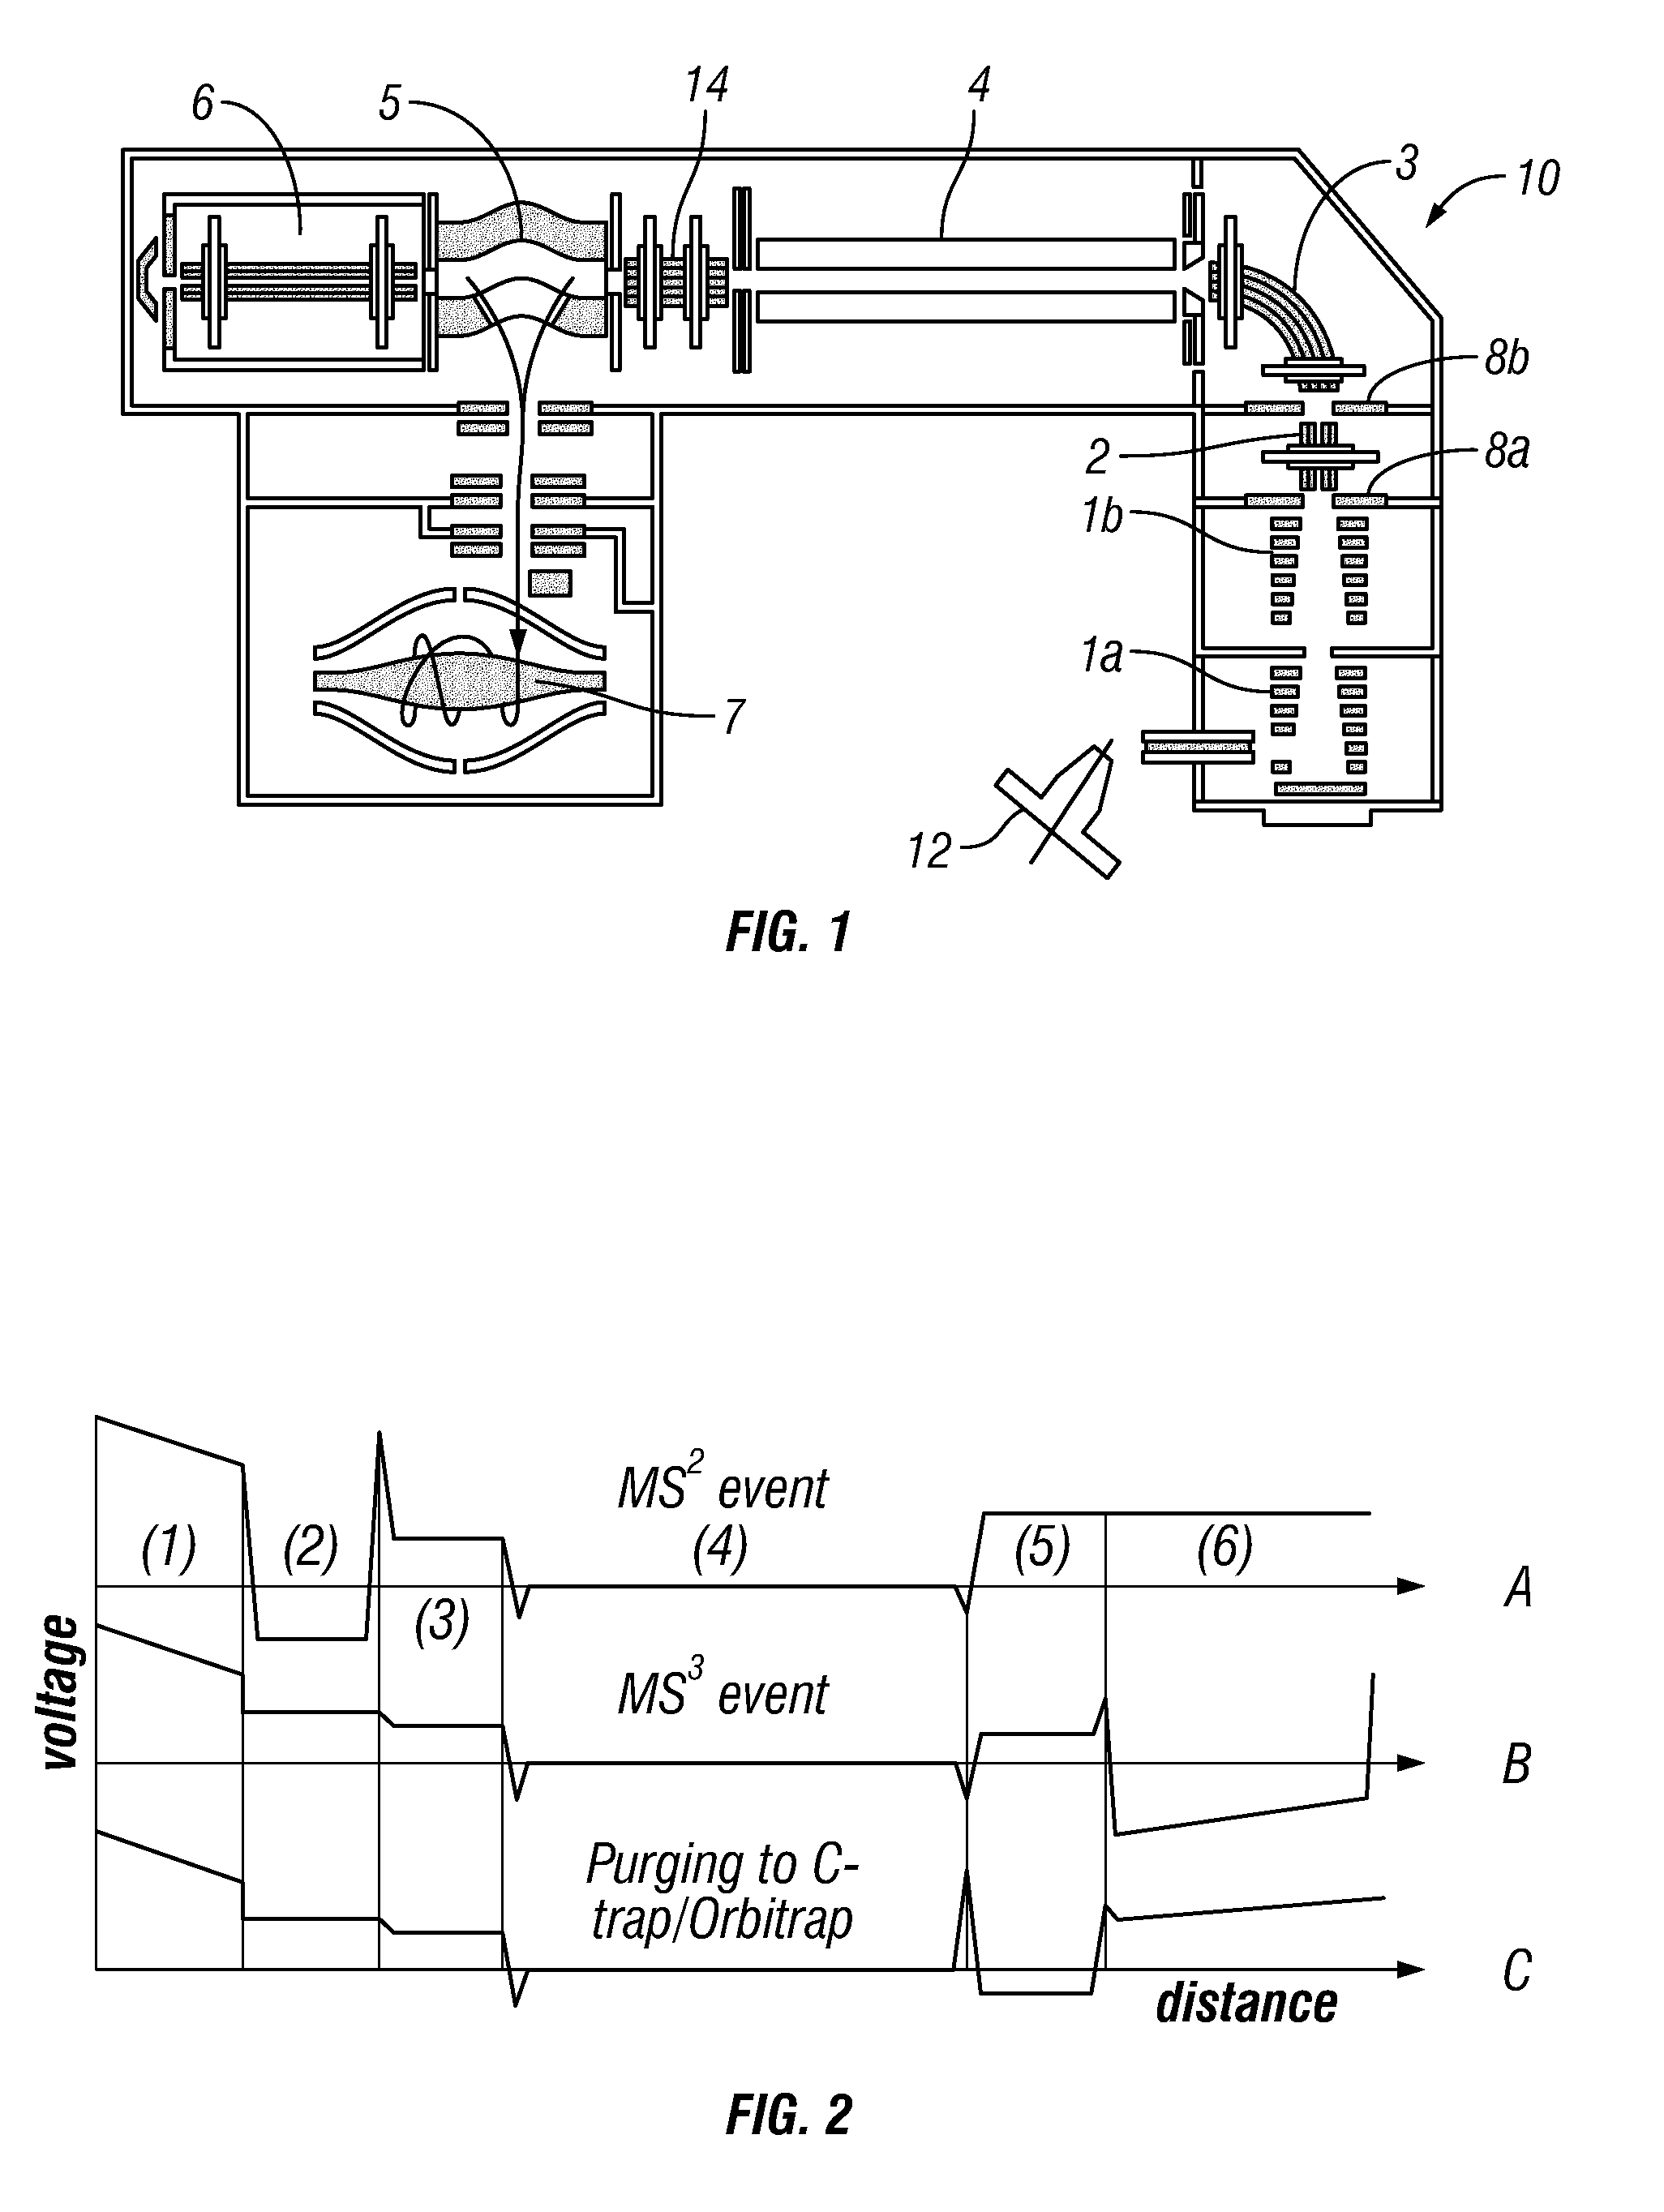 Method and Apparatus for Mass Spectrometry of Macromolecular Complexes